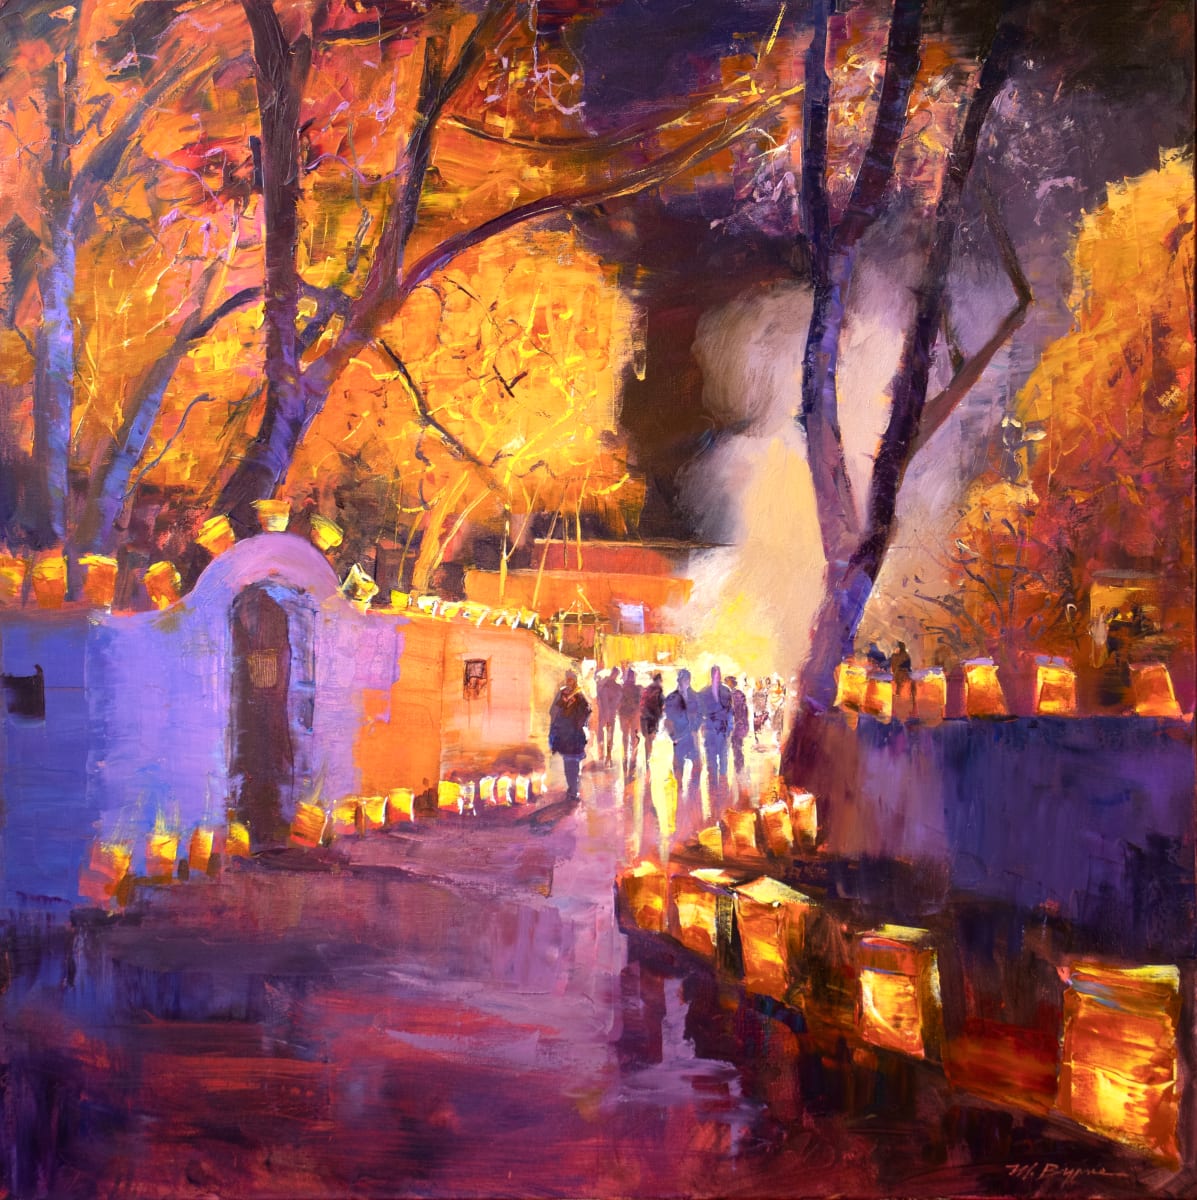 Luminaria Gathering by MICHELE BYRNE 